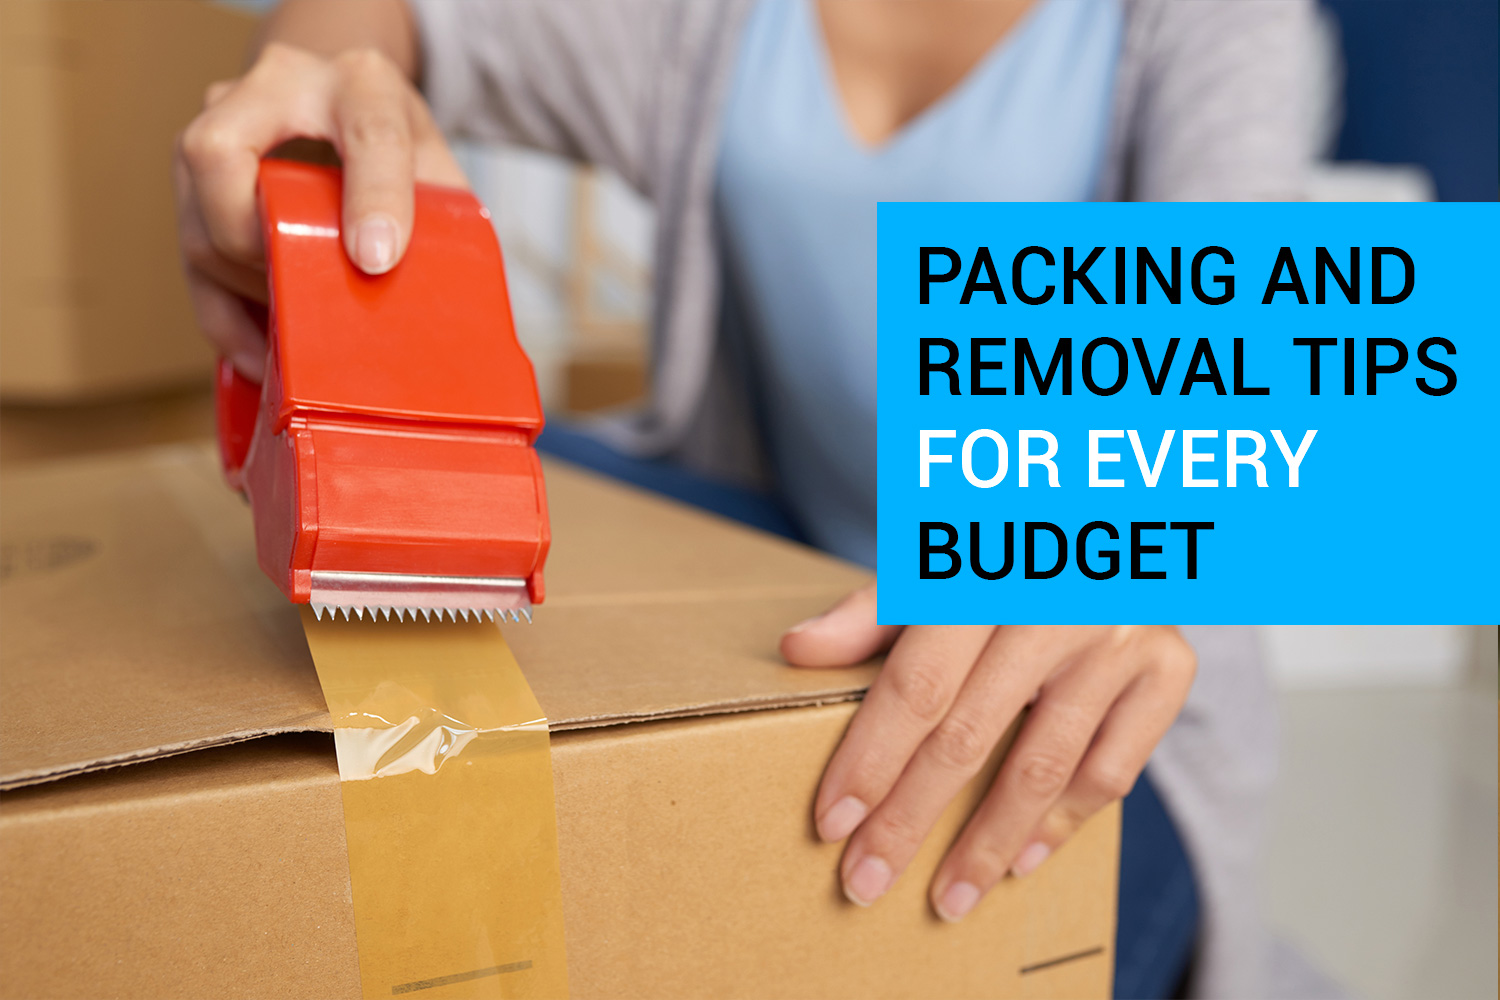 Packing and Removal Tips for Every Budget